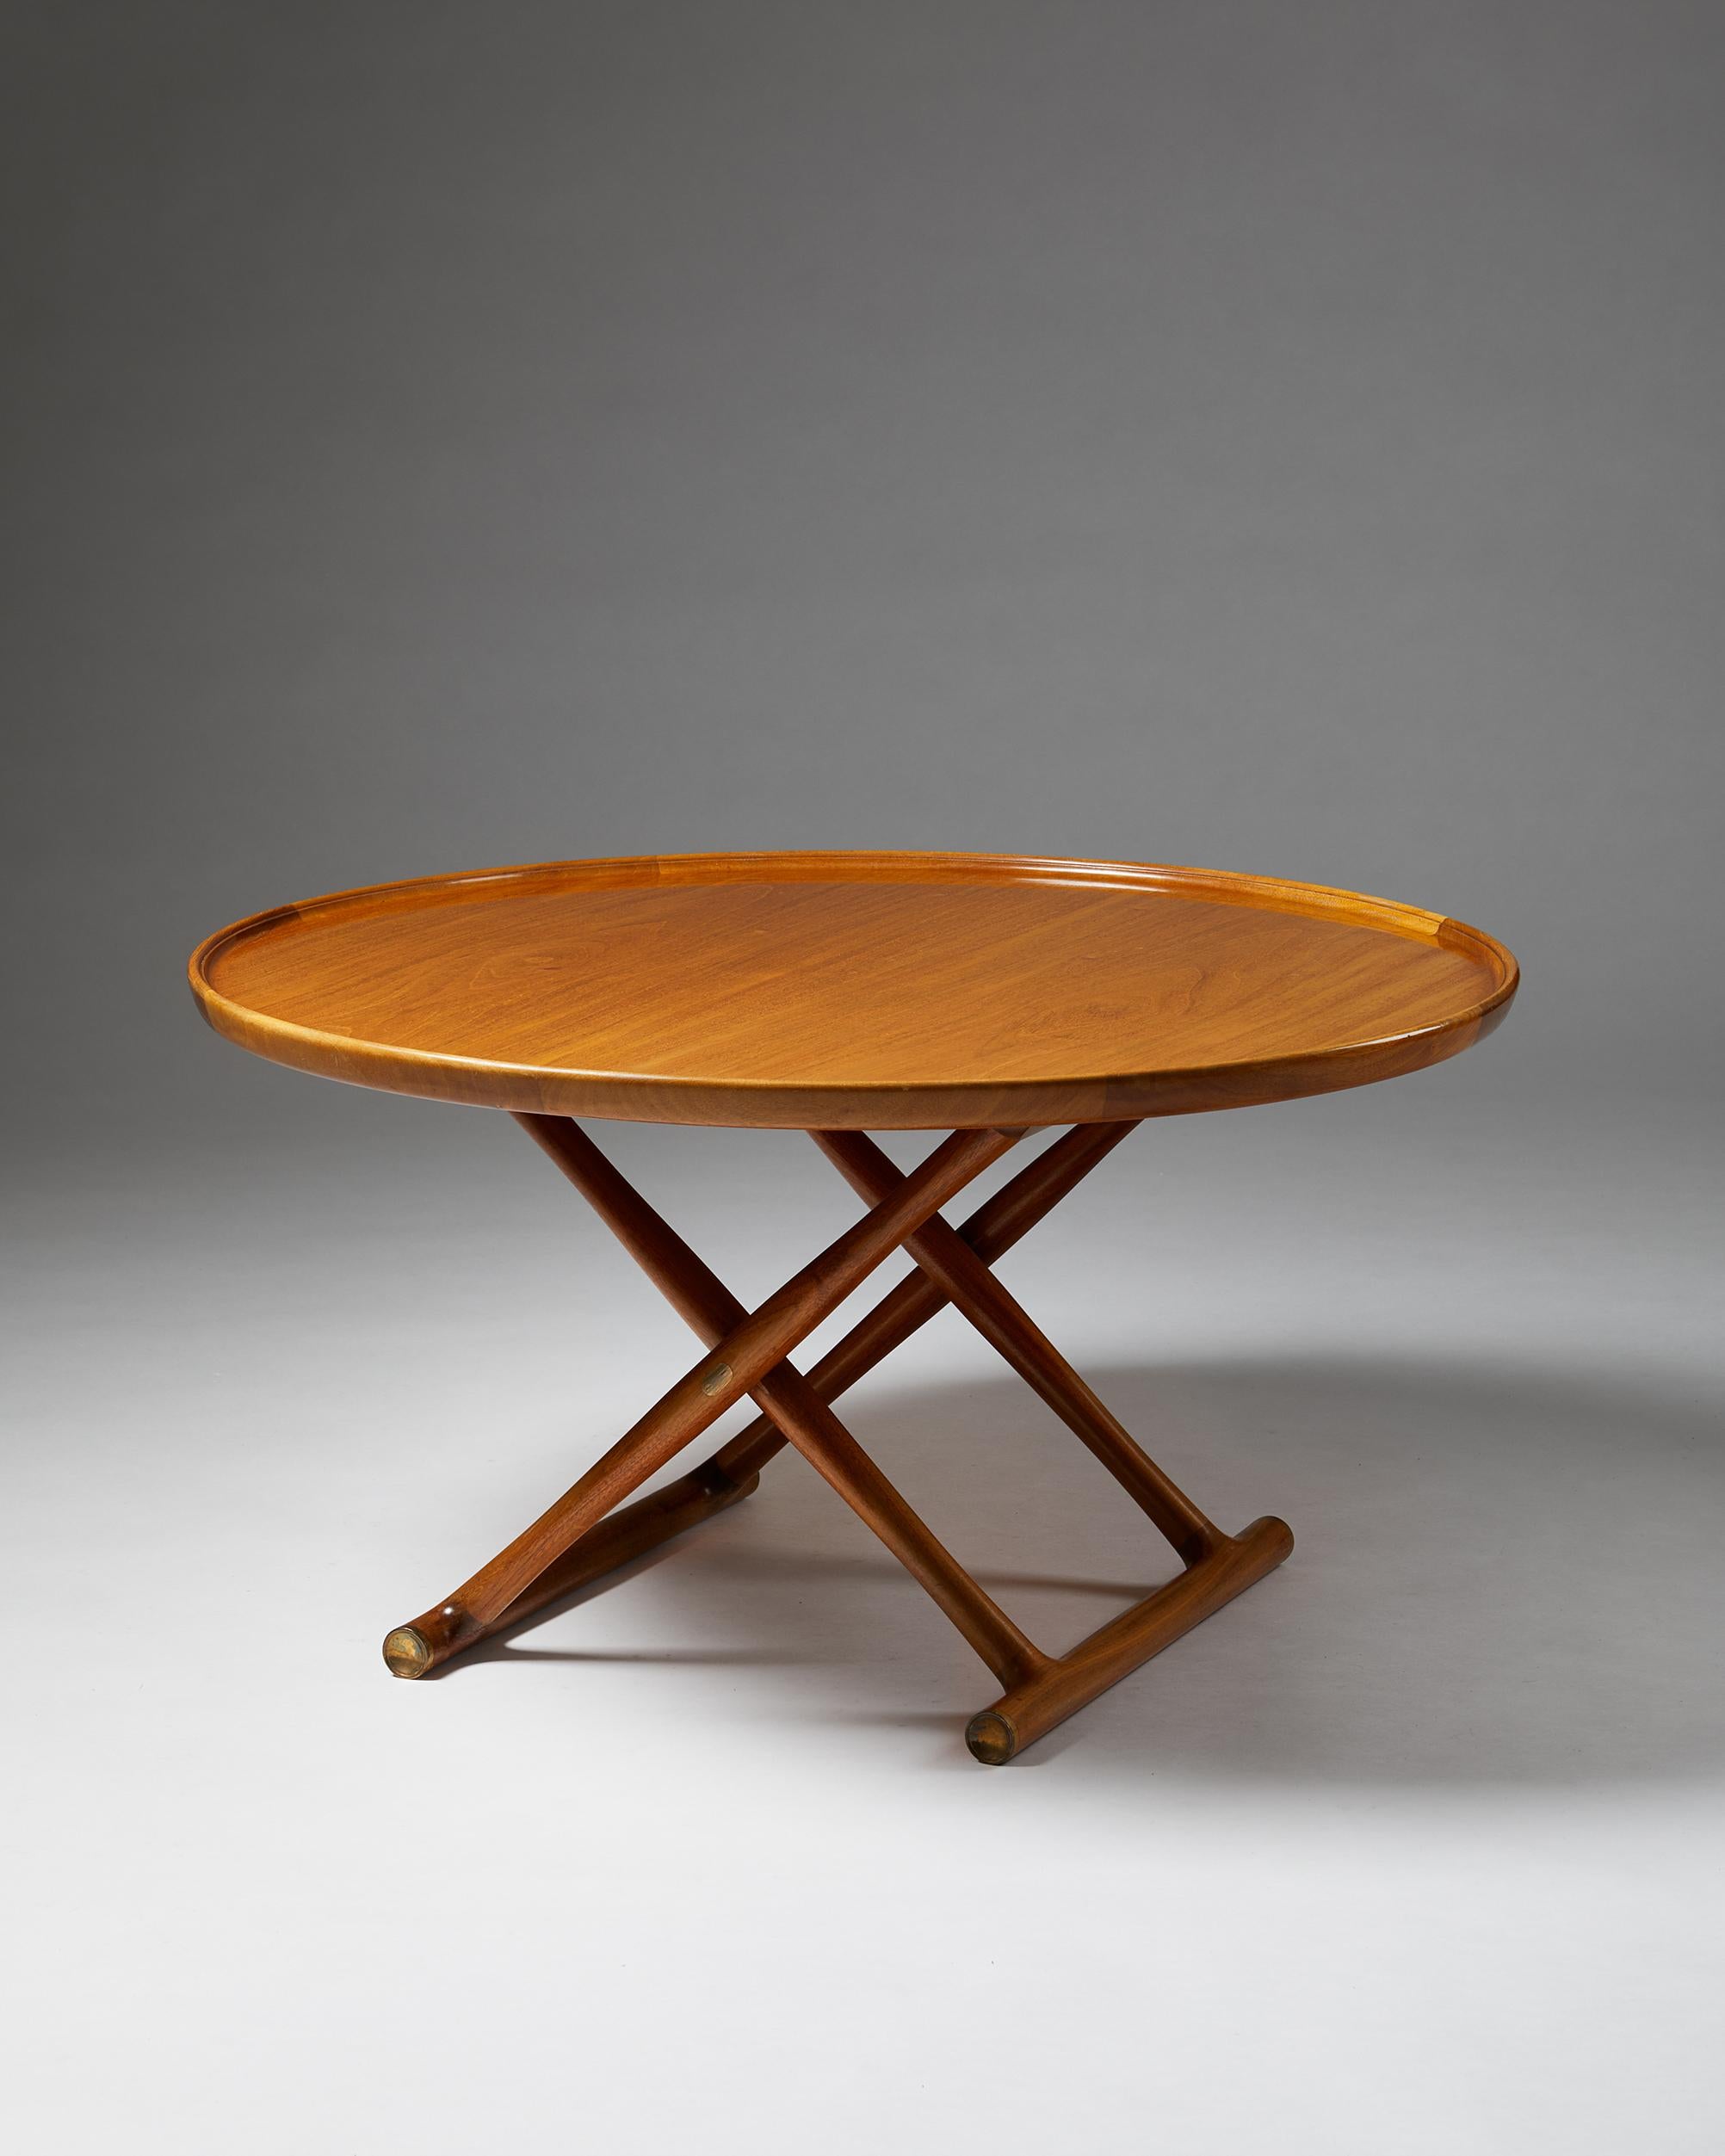 Occasional table “The Egyptian table”, designed by Mogens Lassen for Rud Rasmussen, Denmark. 1935.

Mahogany, foldable frame and top with raised edge, brass fittings.

Dimensions: 
H: 52 cm / 1' 9